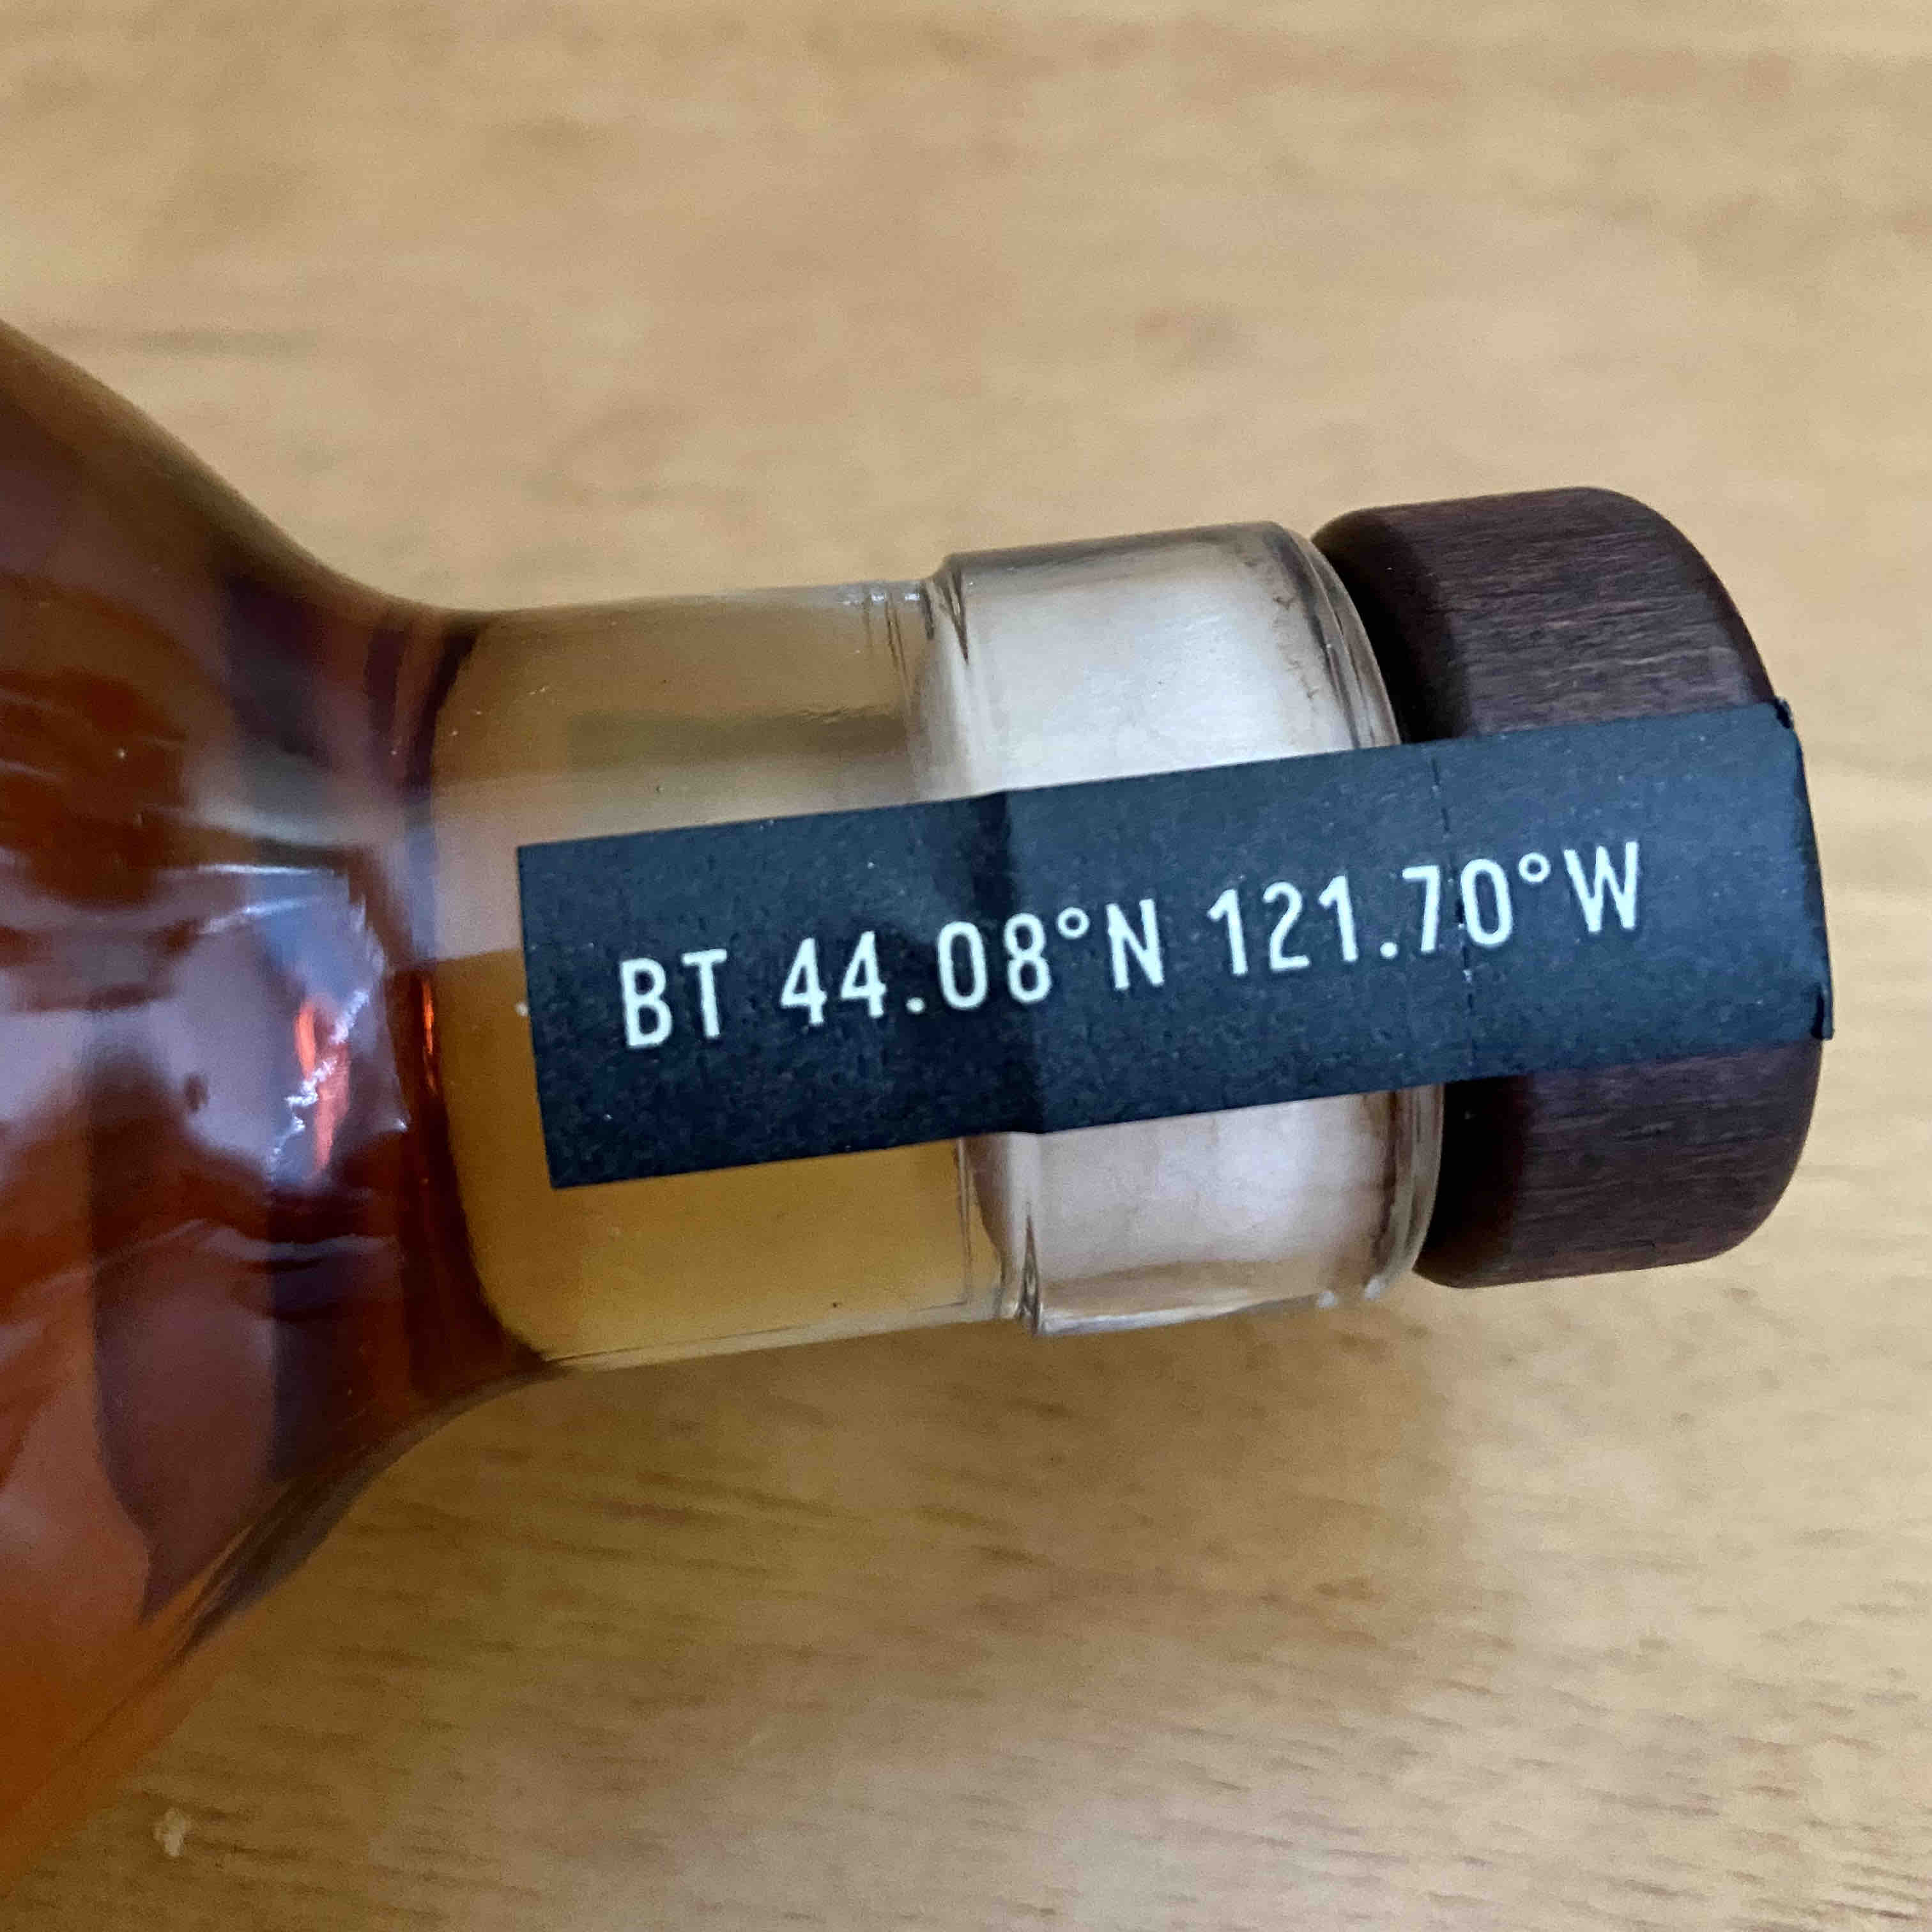 The coordinates of 44.08°N 121.70°W on the bottle cap tape of Broken Top Straight Rye Whiskey lead to Broken Top outside...</a><br />
<br /> <a href=